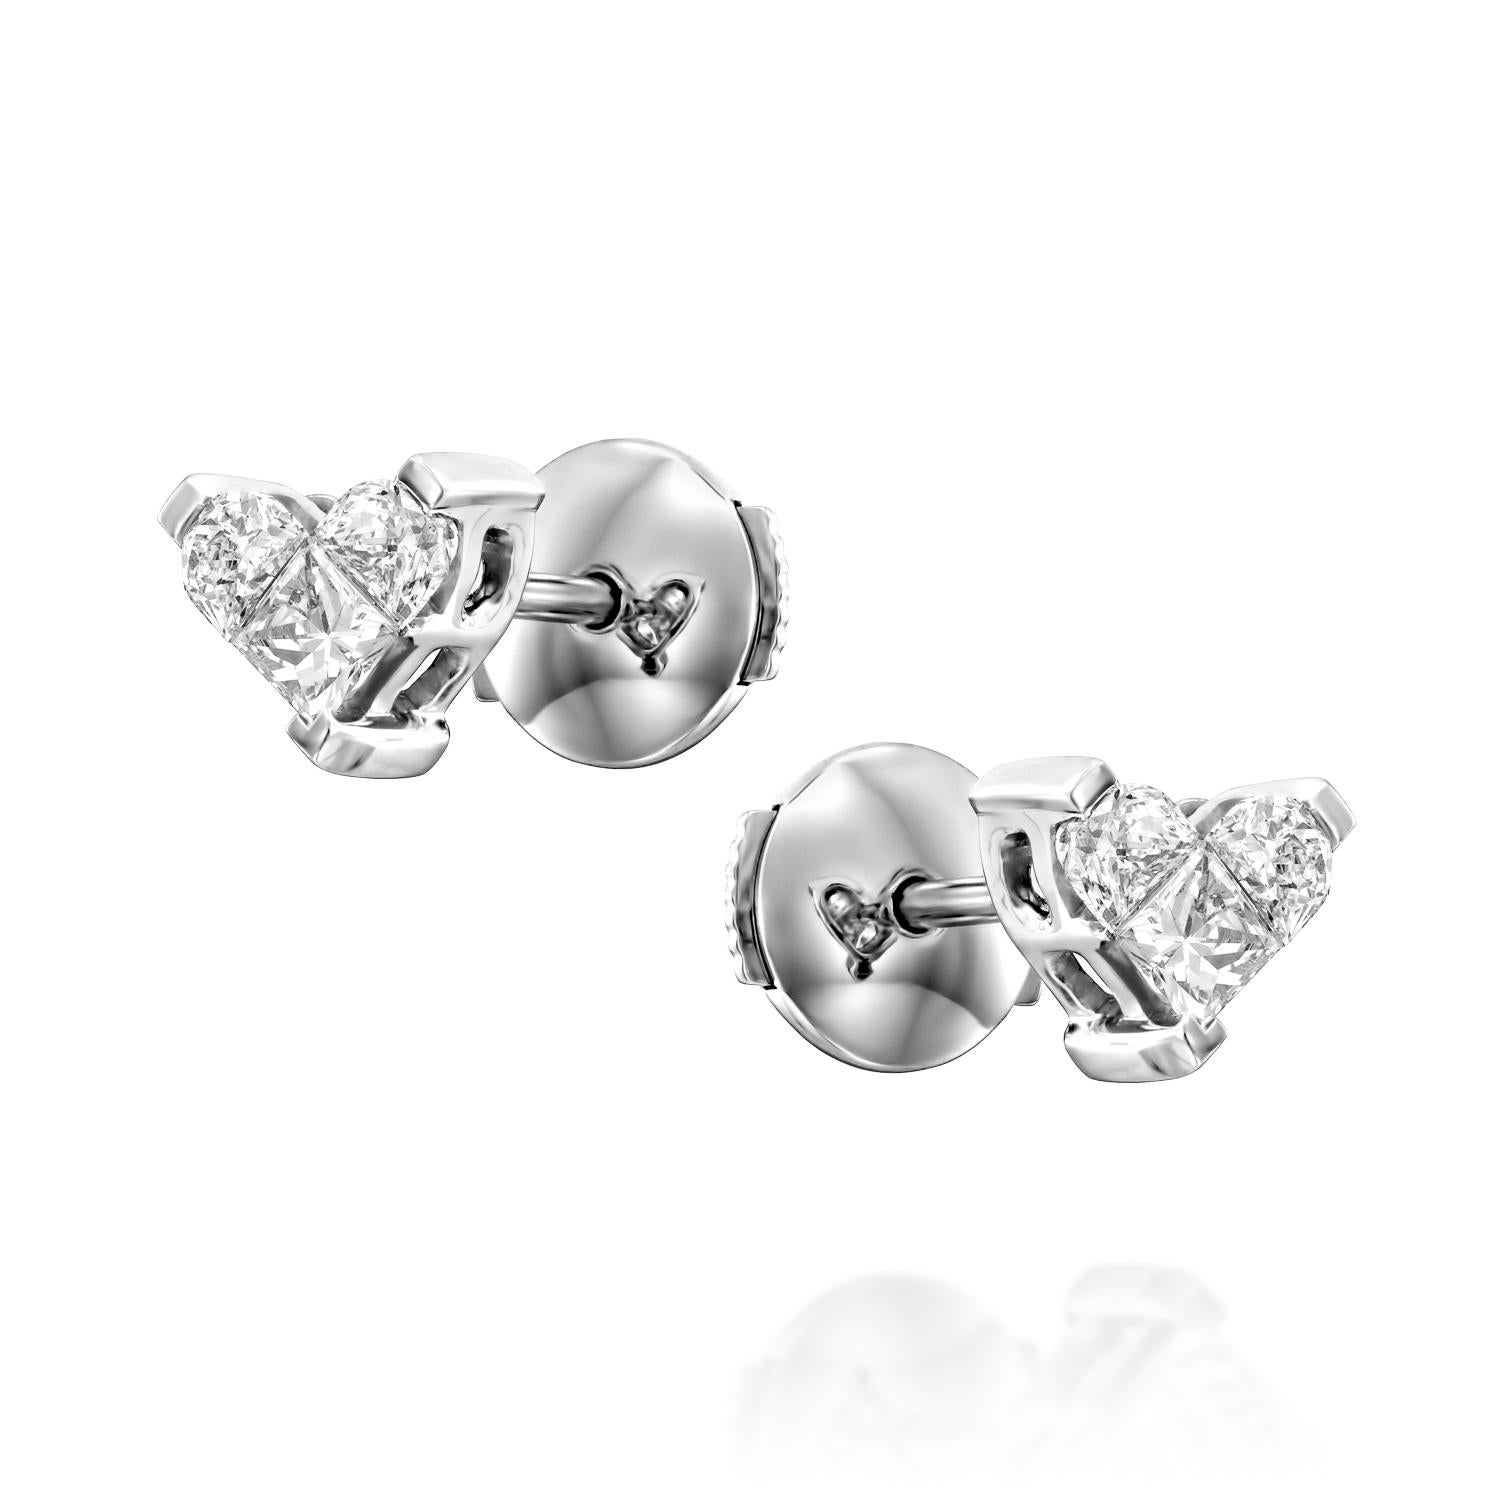 Create your love story: Heart Diamond White Gold Invisible Setting Earrings

Experience the allure of our exquisite Heart Diamond White Gold Invisible Setting Studs, crafted to perfection for those who appreciate the finest in jewellery. Adorned